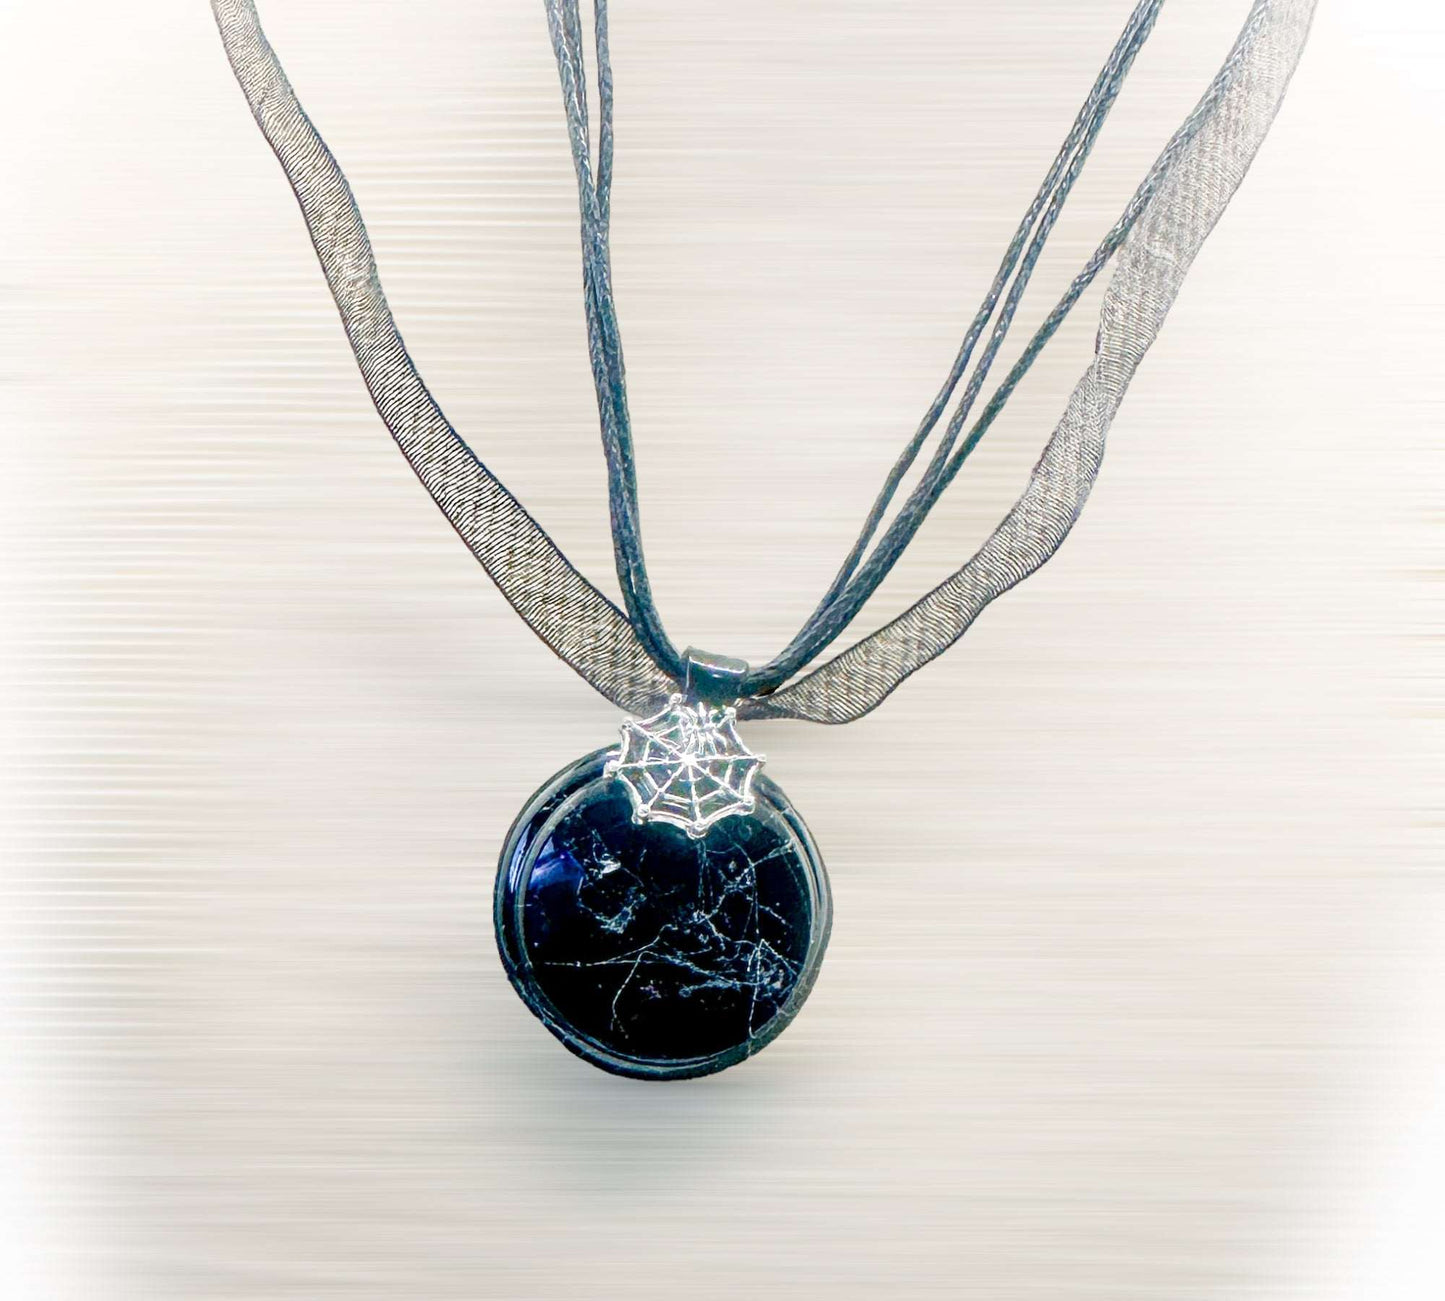 Spiderweb-Inspired Resin Pendant Necklace - Nature's Beauty on Display